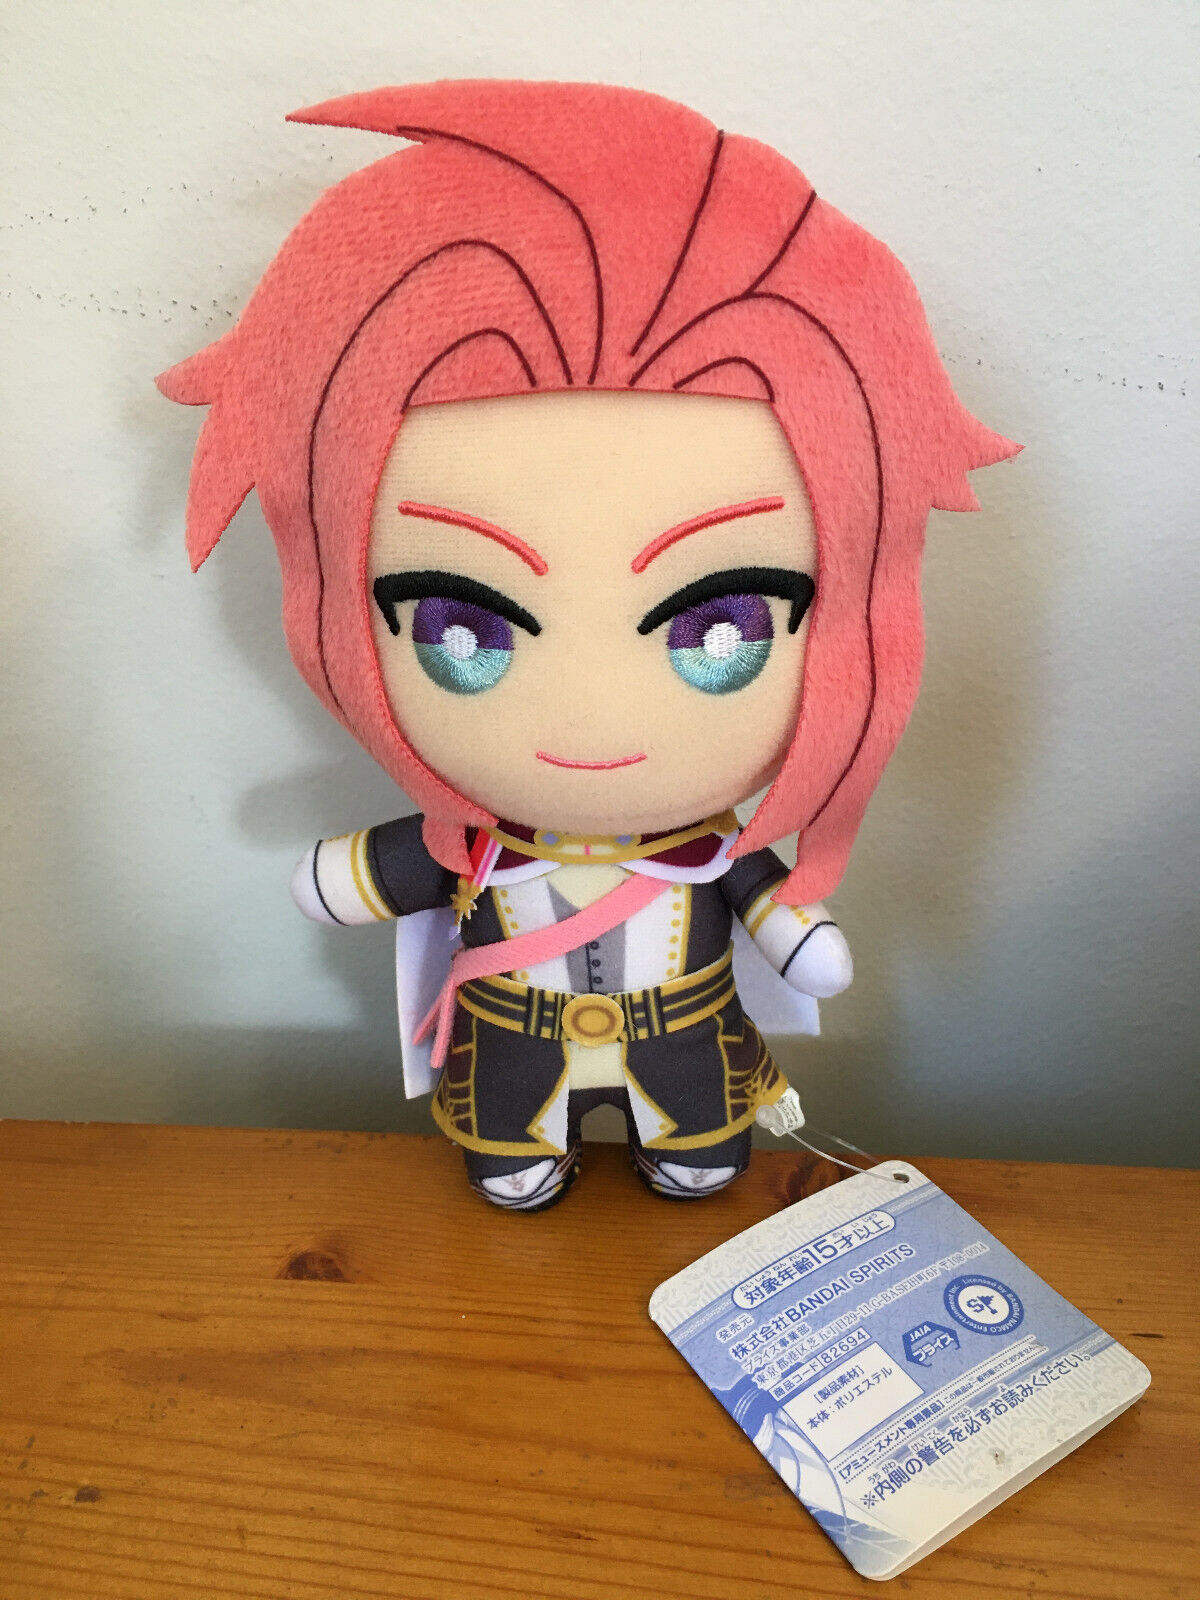 Tales of Symphonia Zelos Wilder Hanging Plush Tomonui 25th Anniversary Vol. 2